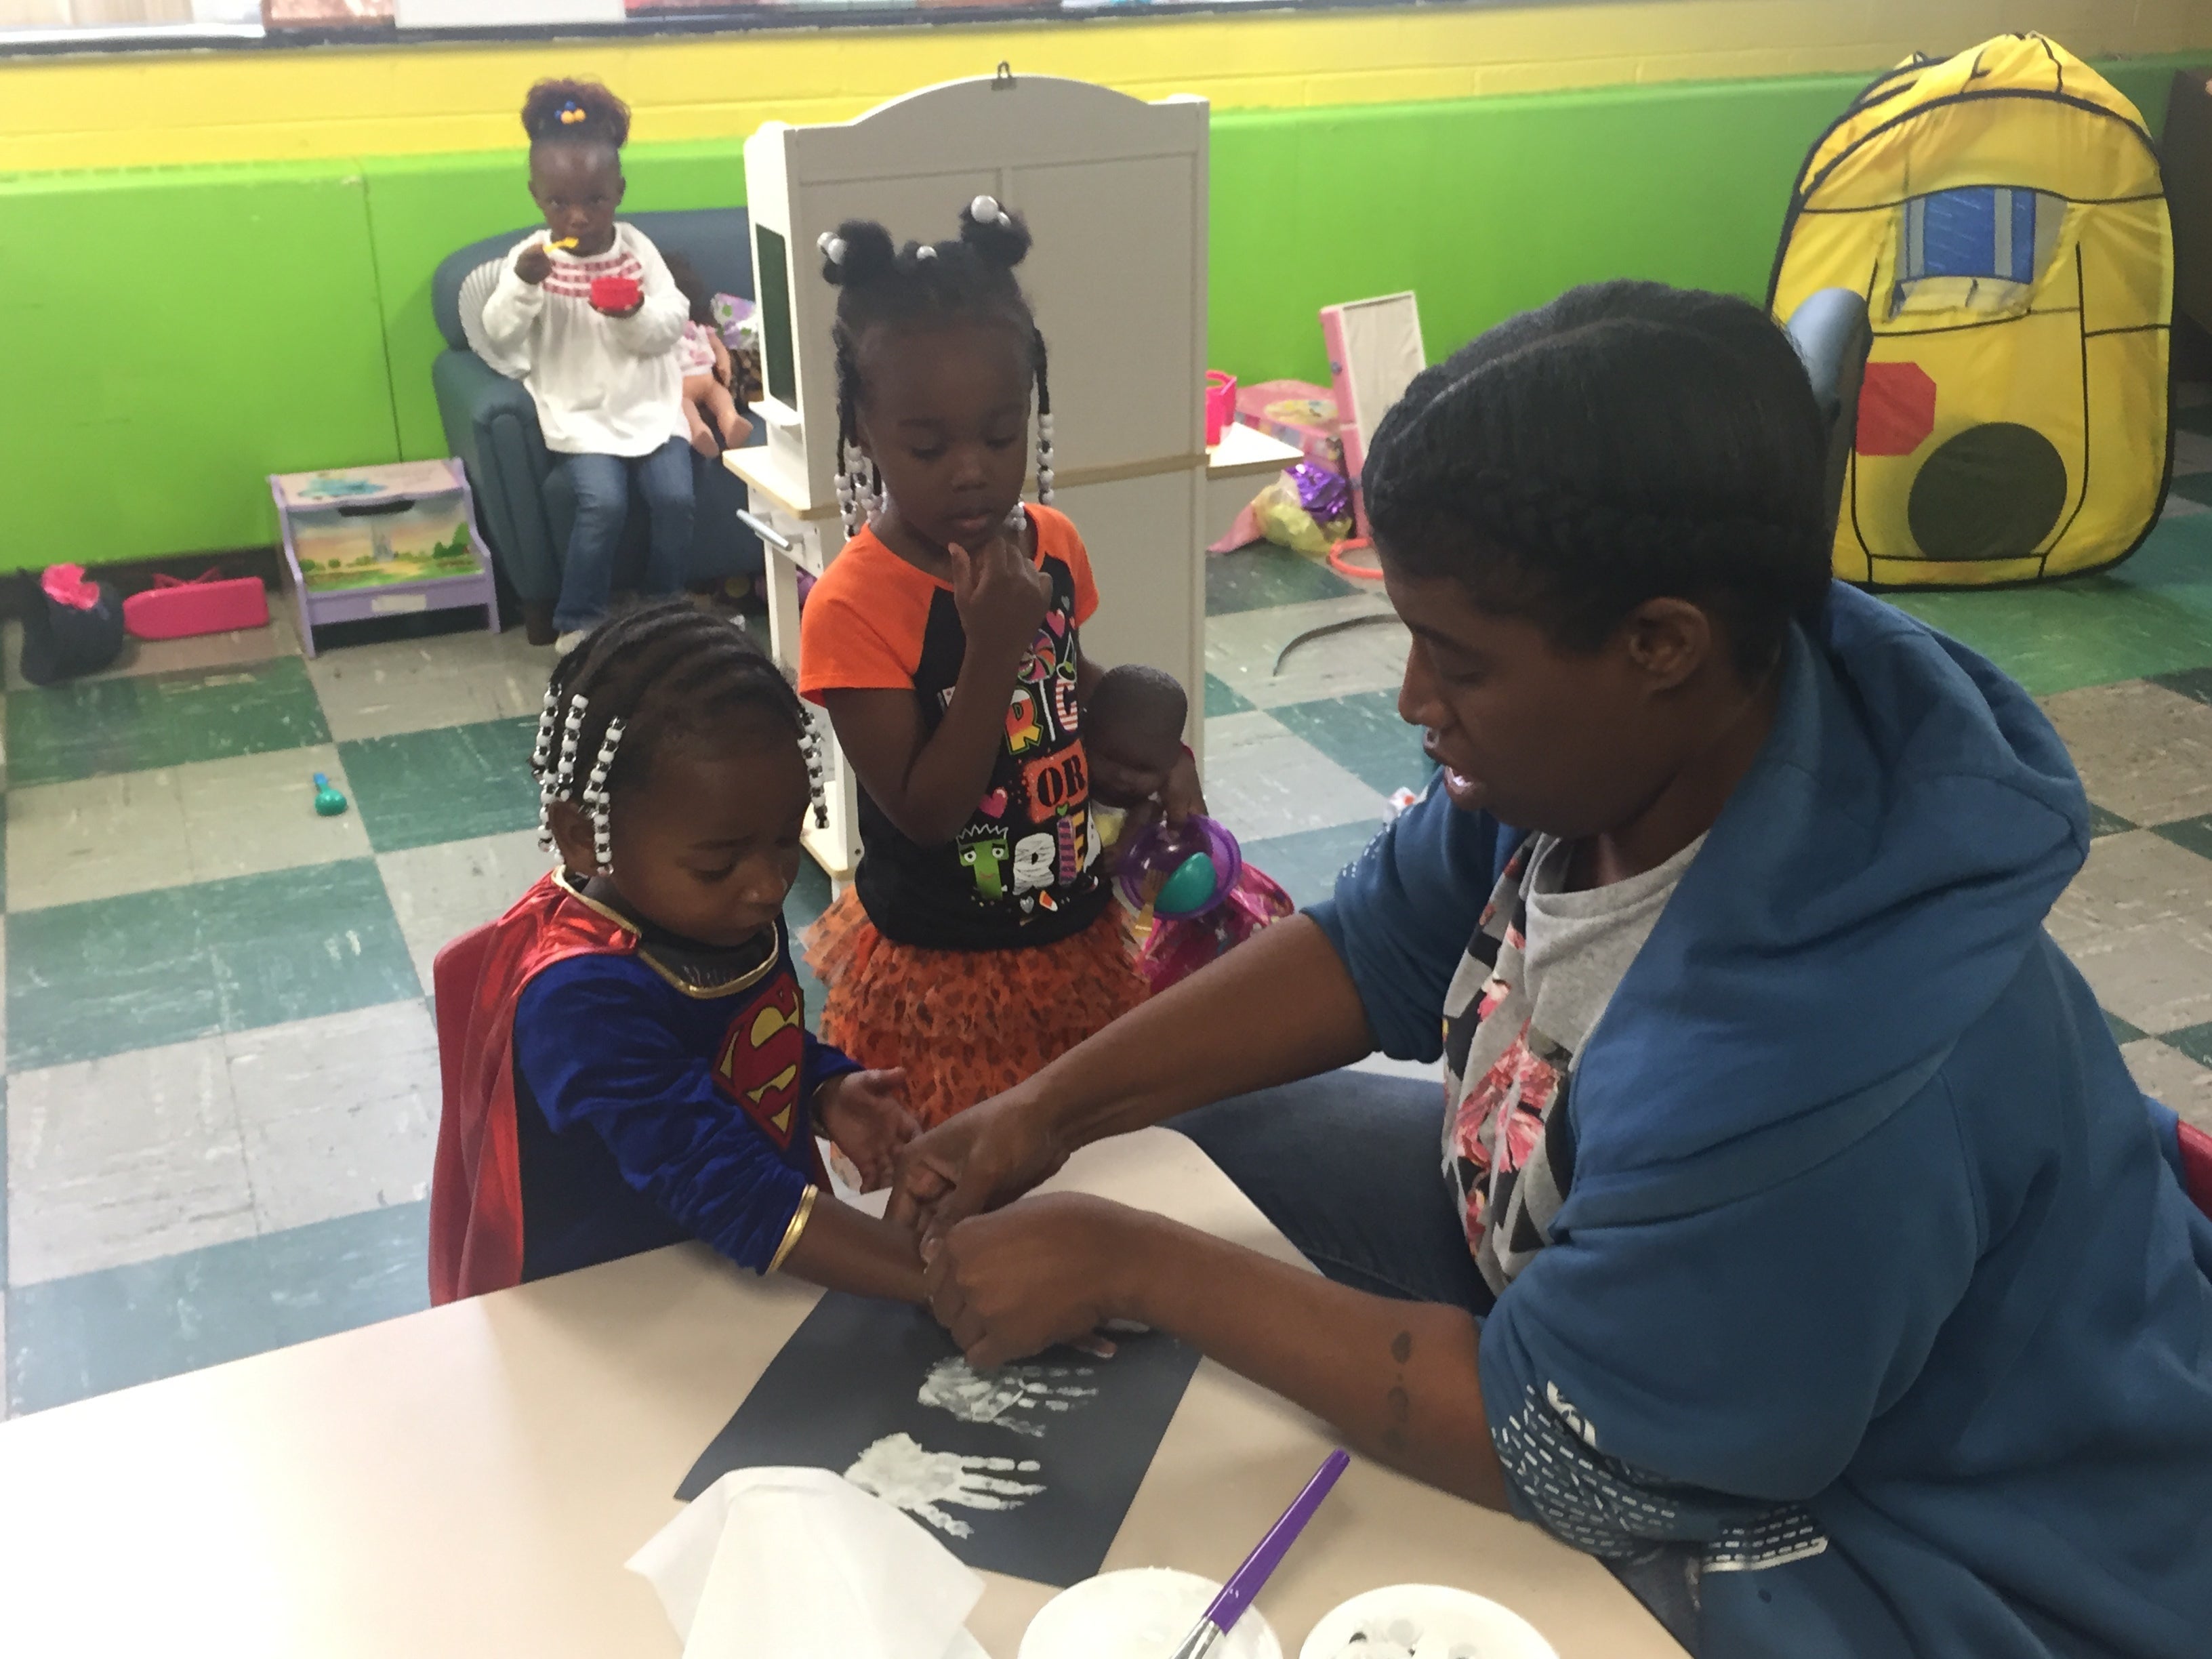 A caregiver works with children 